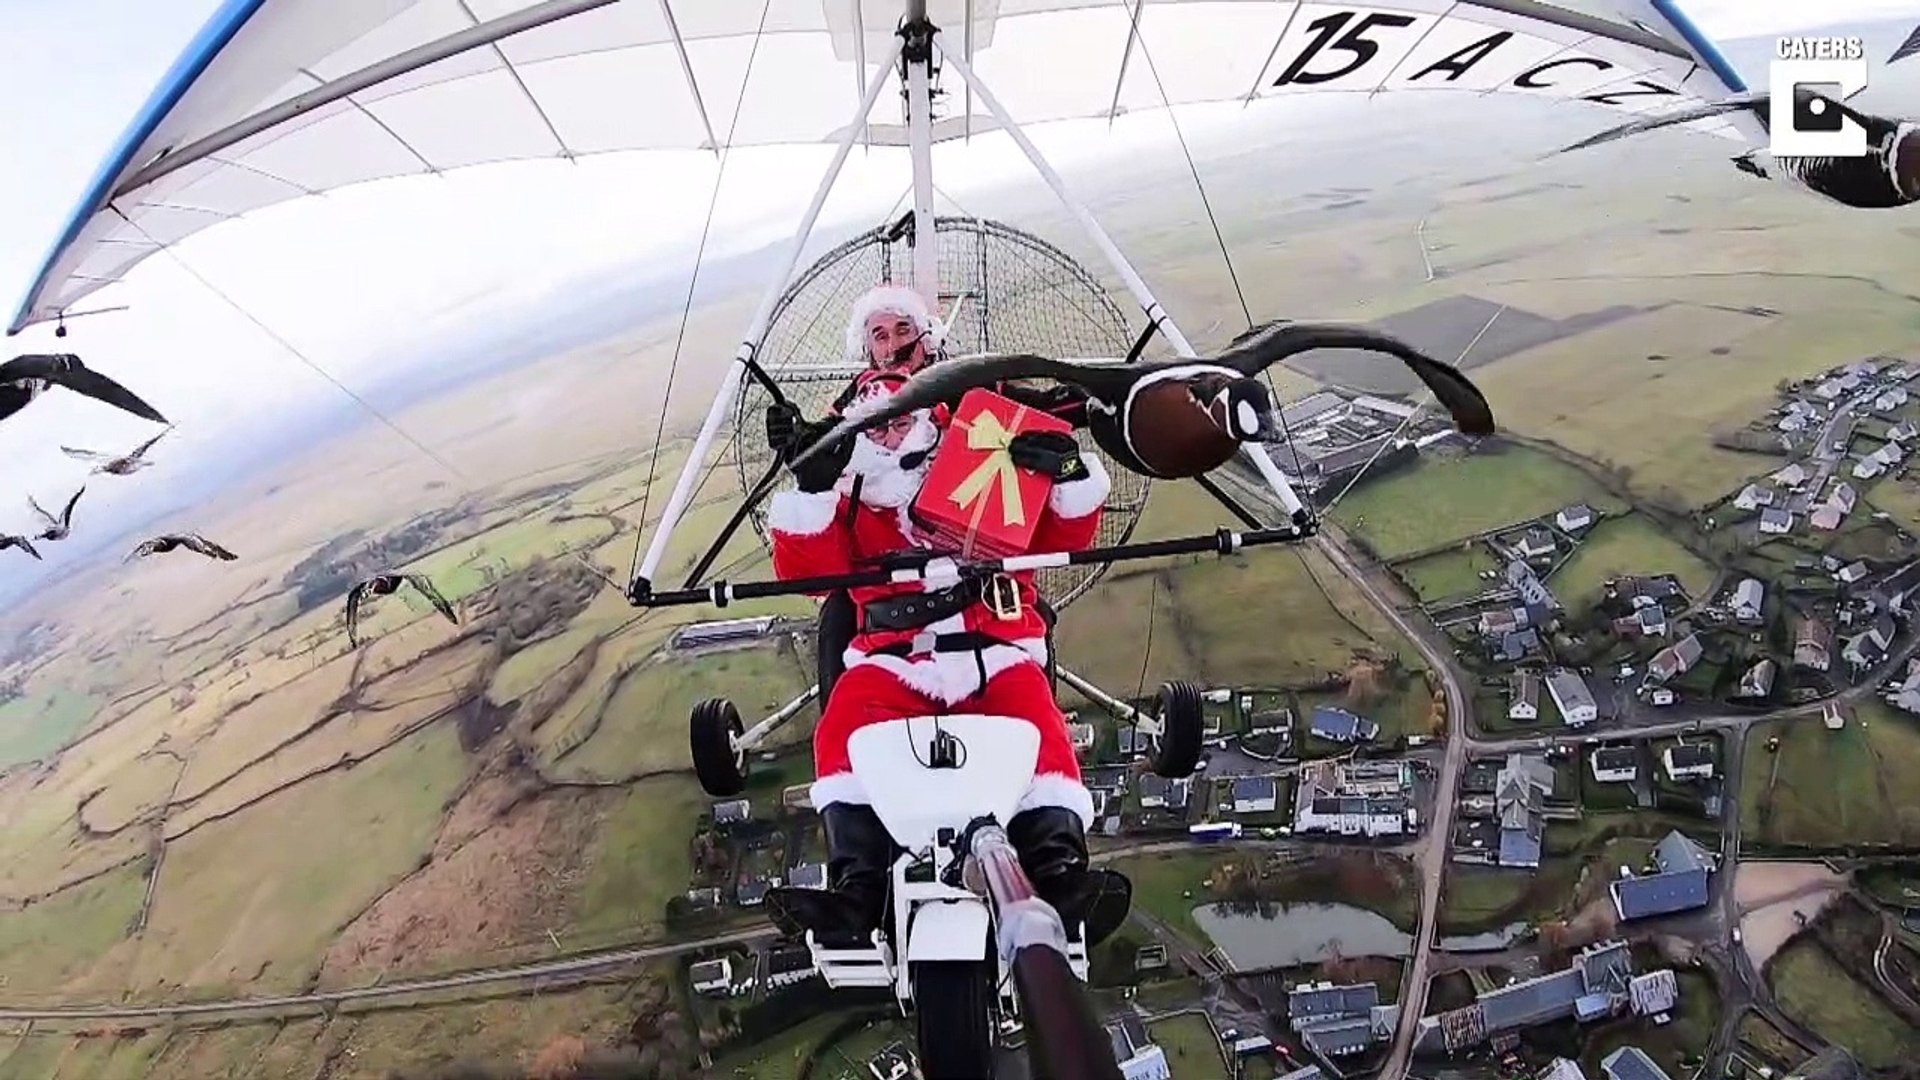 1920x1080 Santa joined on microlight flight with giant v of flying geese